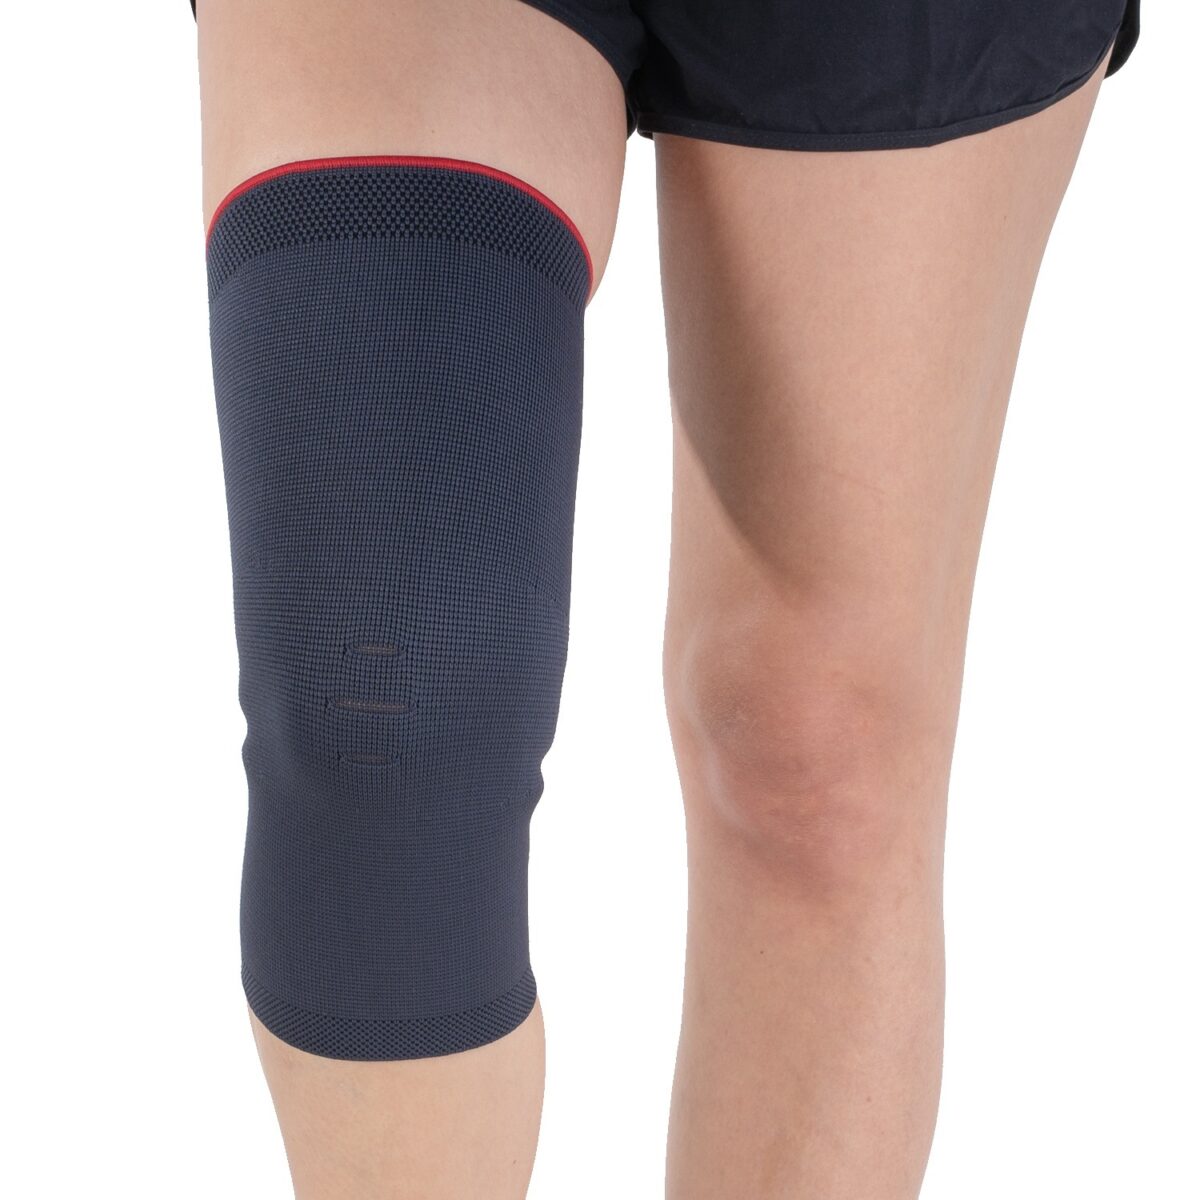 wingmed orthopedic equipments W501 woven knee support 85